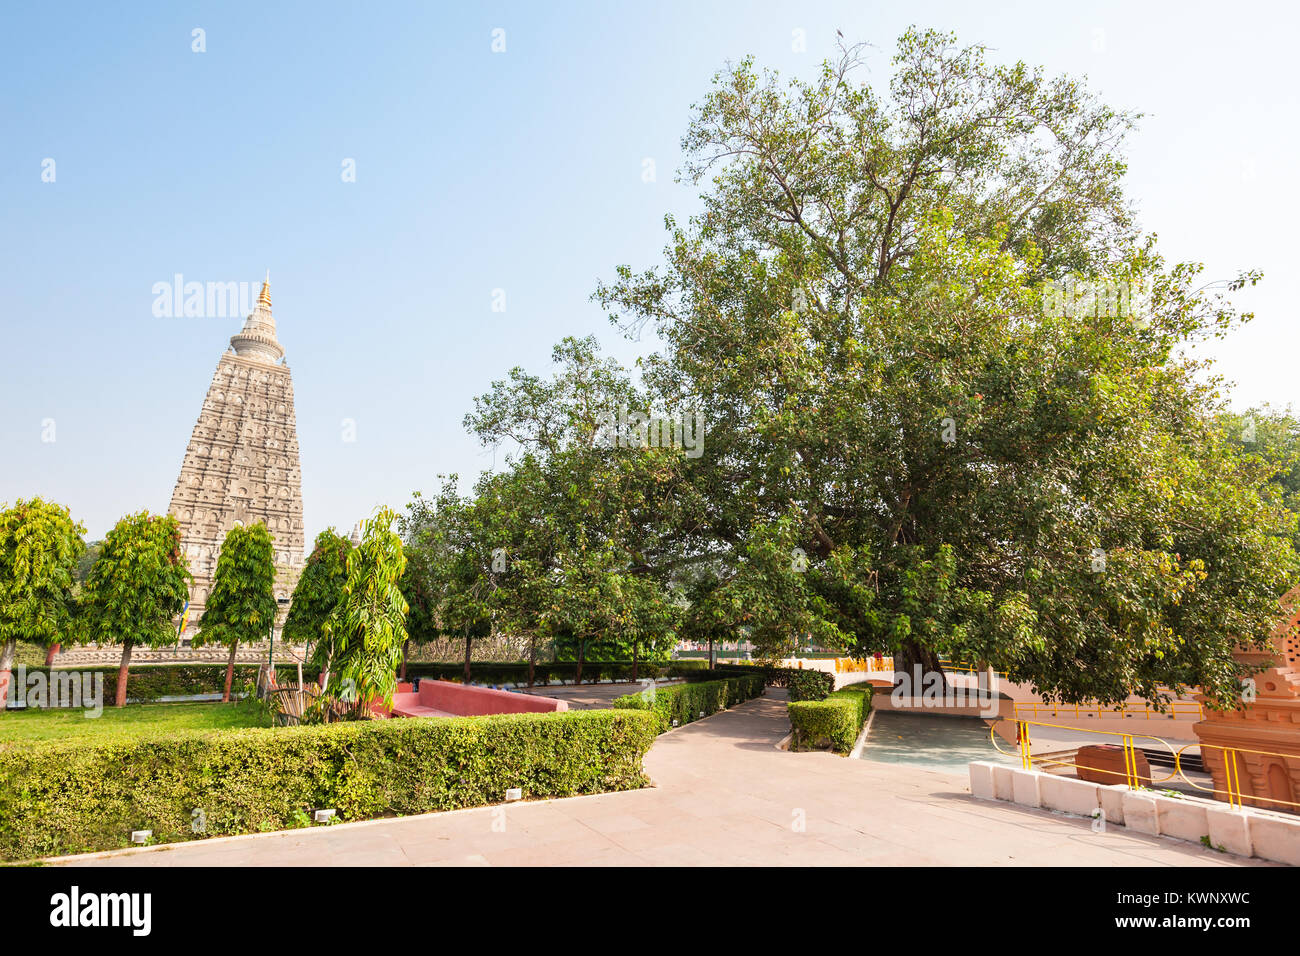 The Bodhi Tree is a large and very old sacred fig tree located in Bodh Gaya, India, under which Siddhartha Gautama Buddha is said to have attained enl Stock Photo